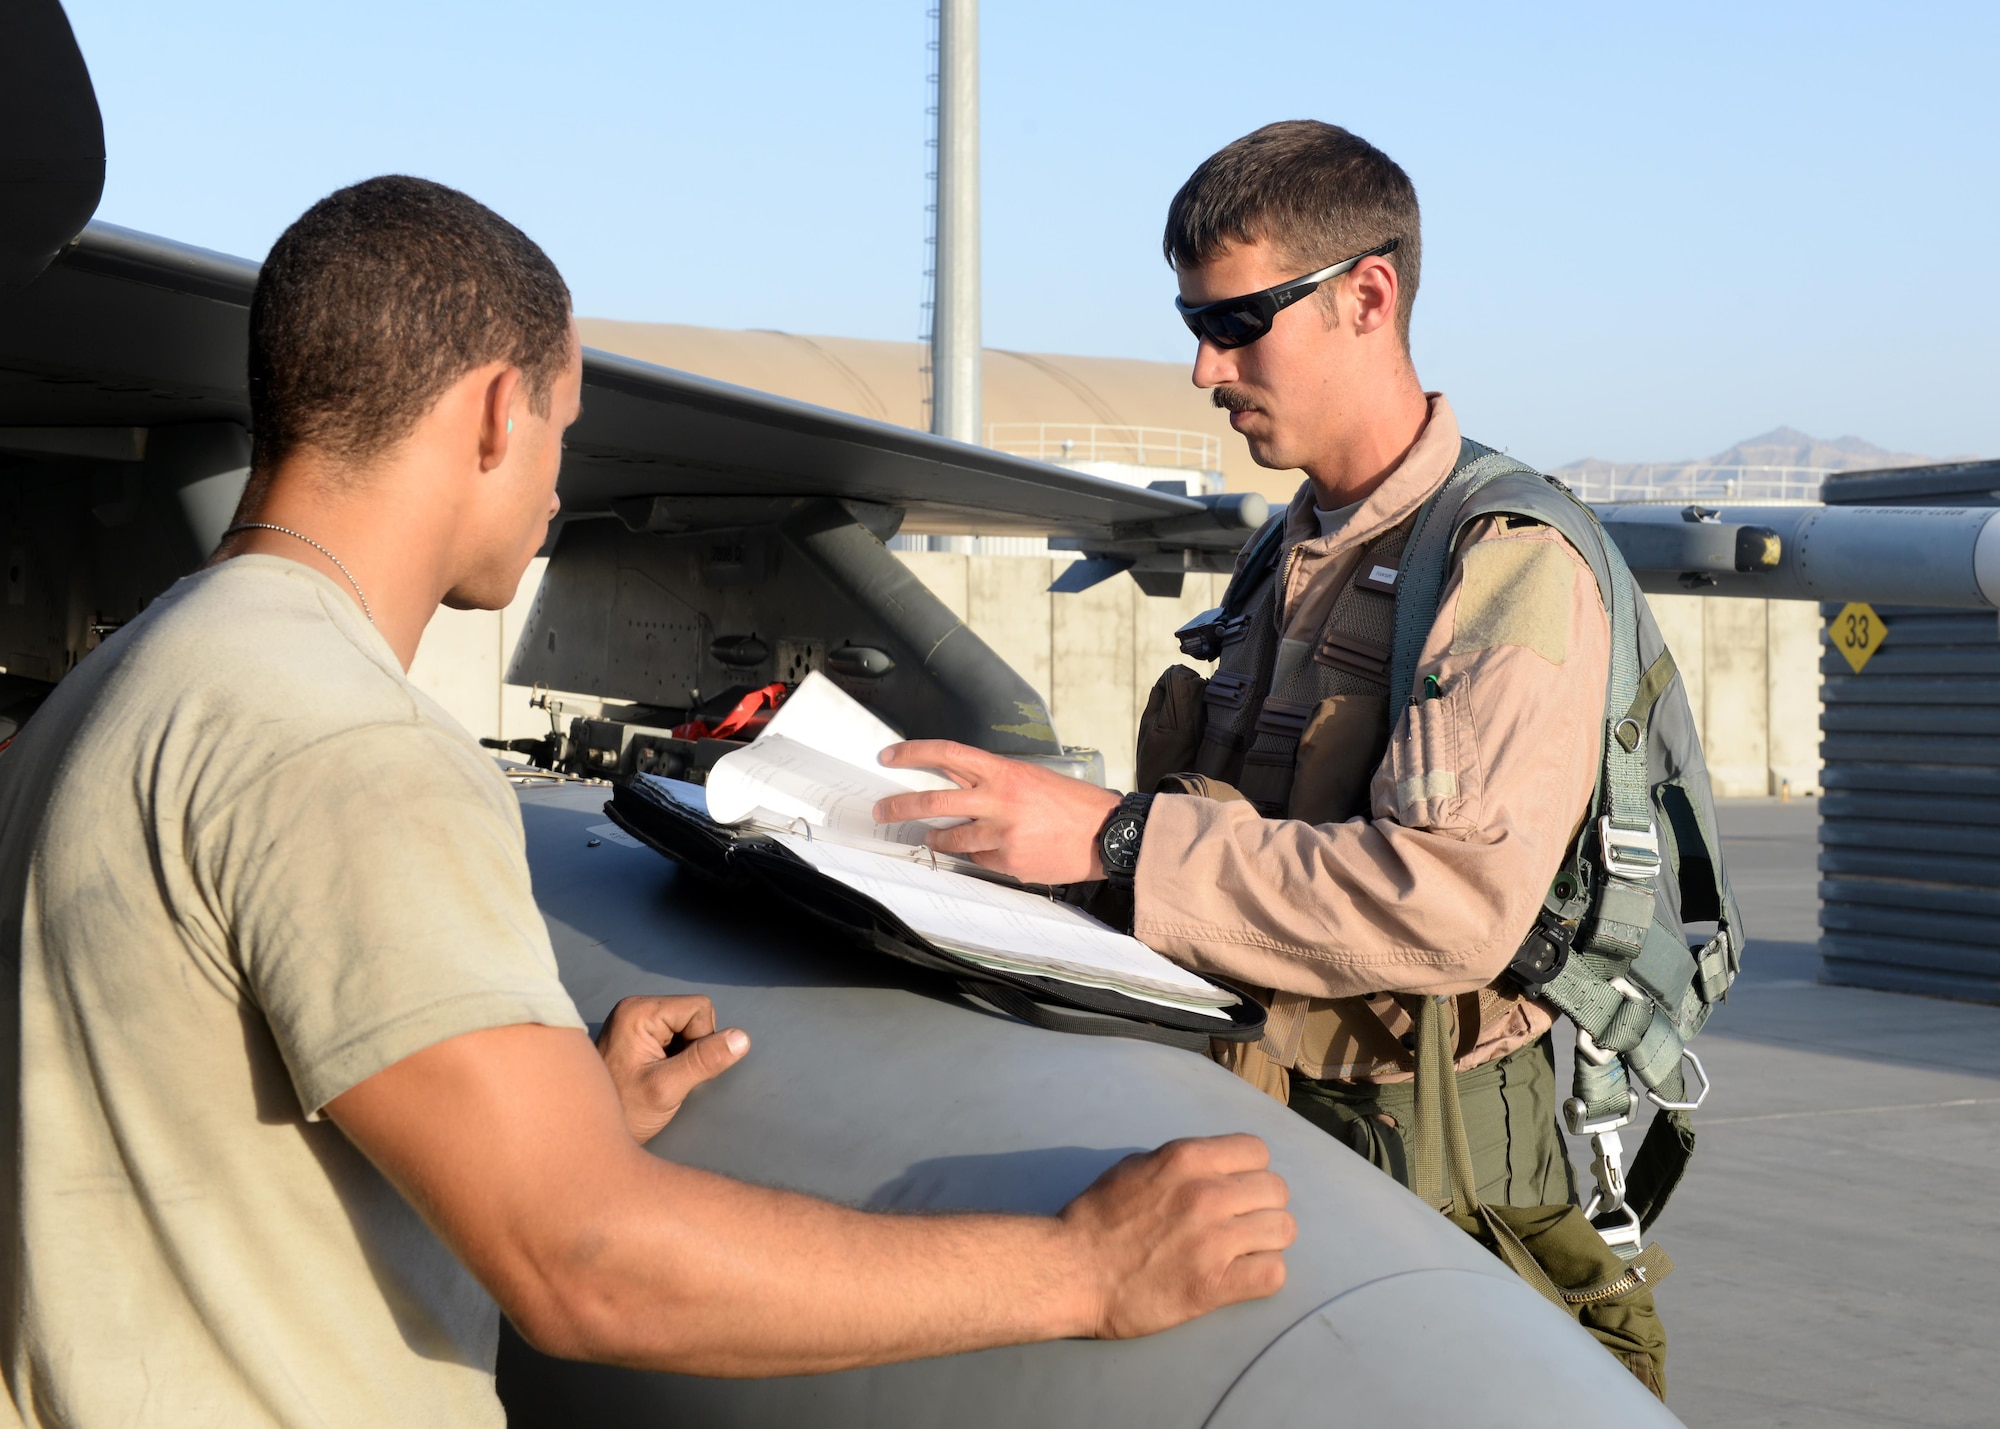 U.S. Air Force Capt. Dakota Olsen, 555th Expeditionary Fighter Squadron F-16 Fighting Falcon pilot, goes over flight information with an F-16 crew chief June 17, 2015, at Bagram Airfield, Afghanistan. Olsen’s job is to provide close air support and armed over watch for military personnel in Afghanistan. He flies various sorties and missions throughout the country on a daily basis providing airpower to ensure a safe and secure environment for personnel at BAF. (U.S. Air Force photo by Senior Airman Cierra Presentado/Released)